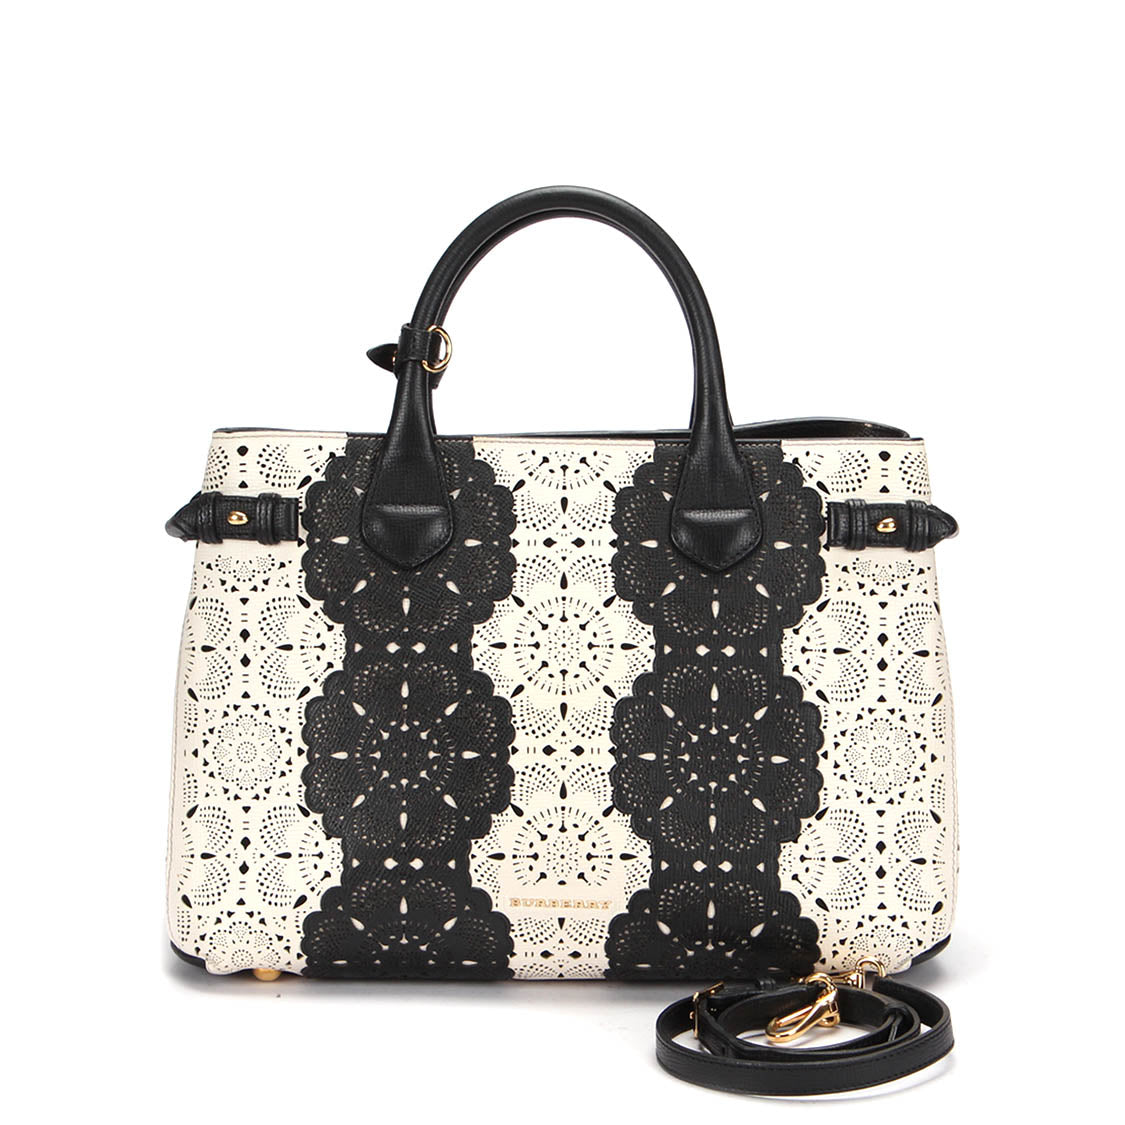 Banner Perforated Leather Tote Bag